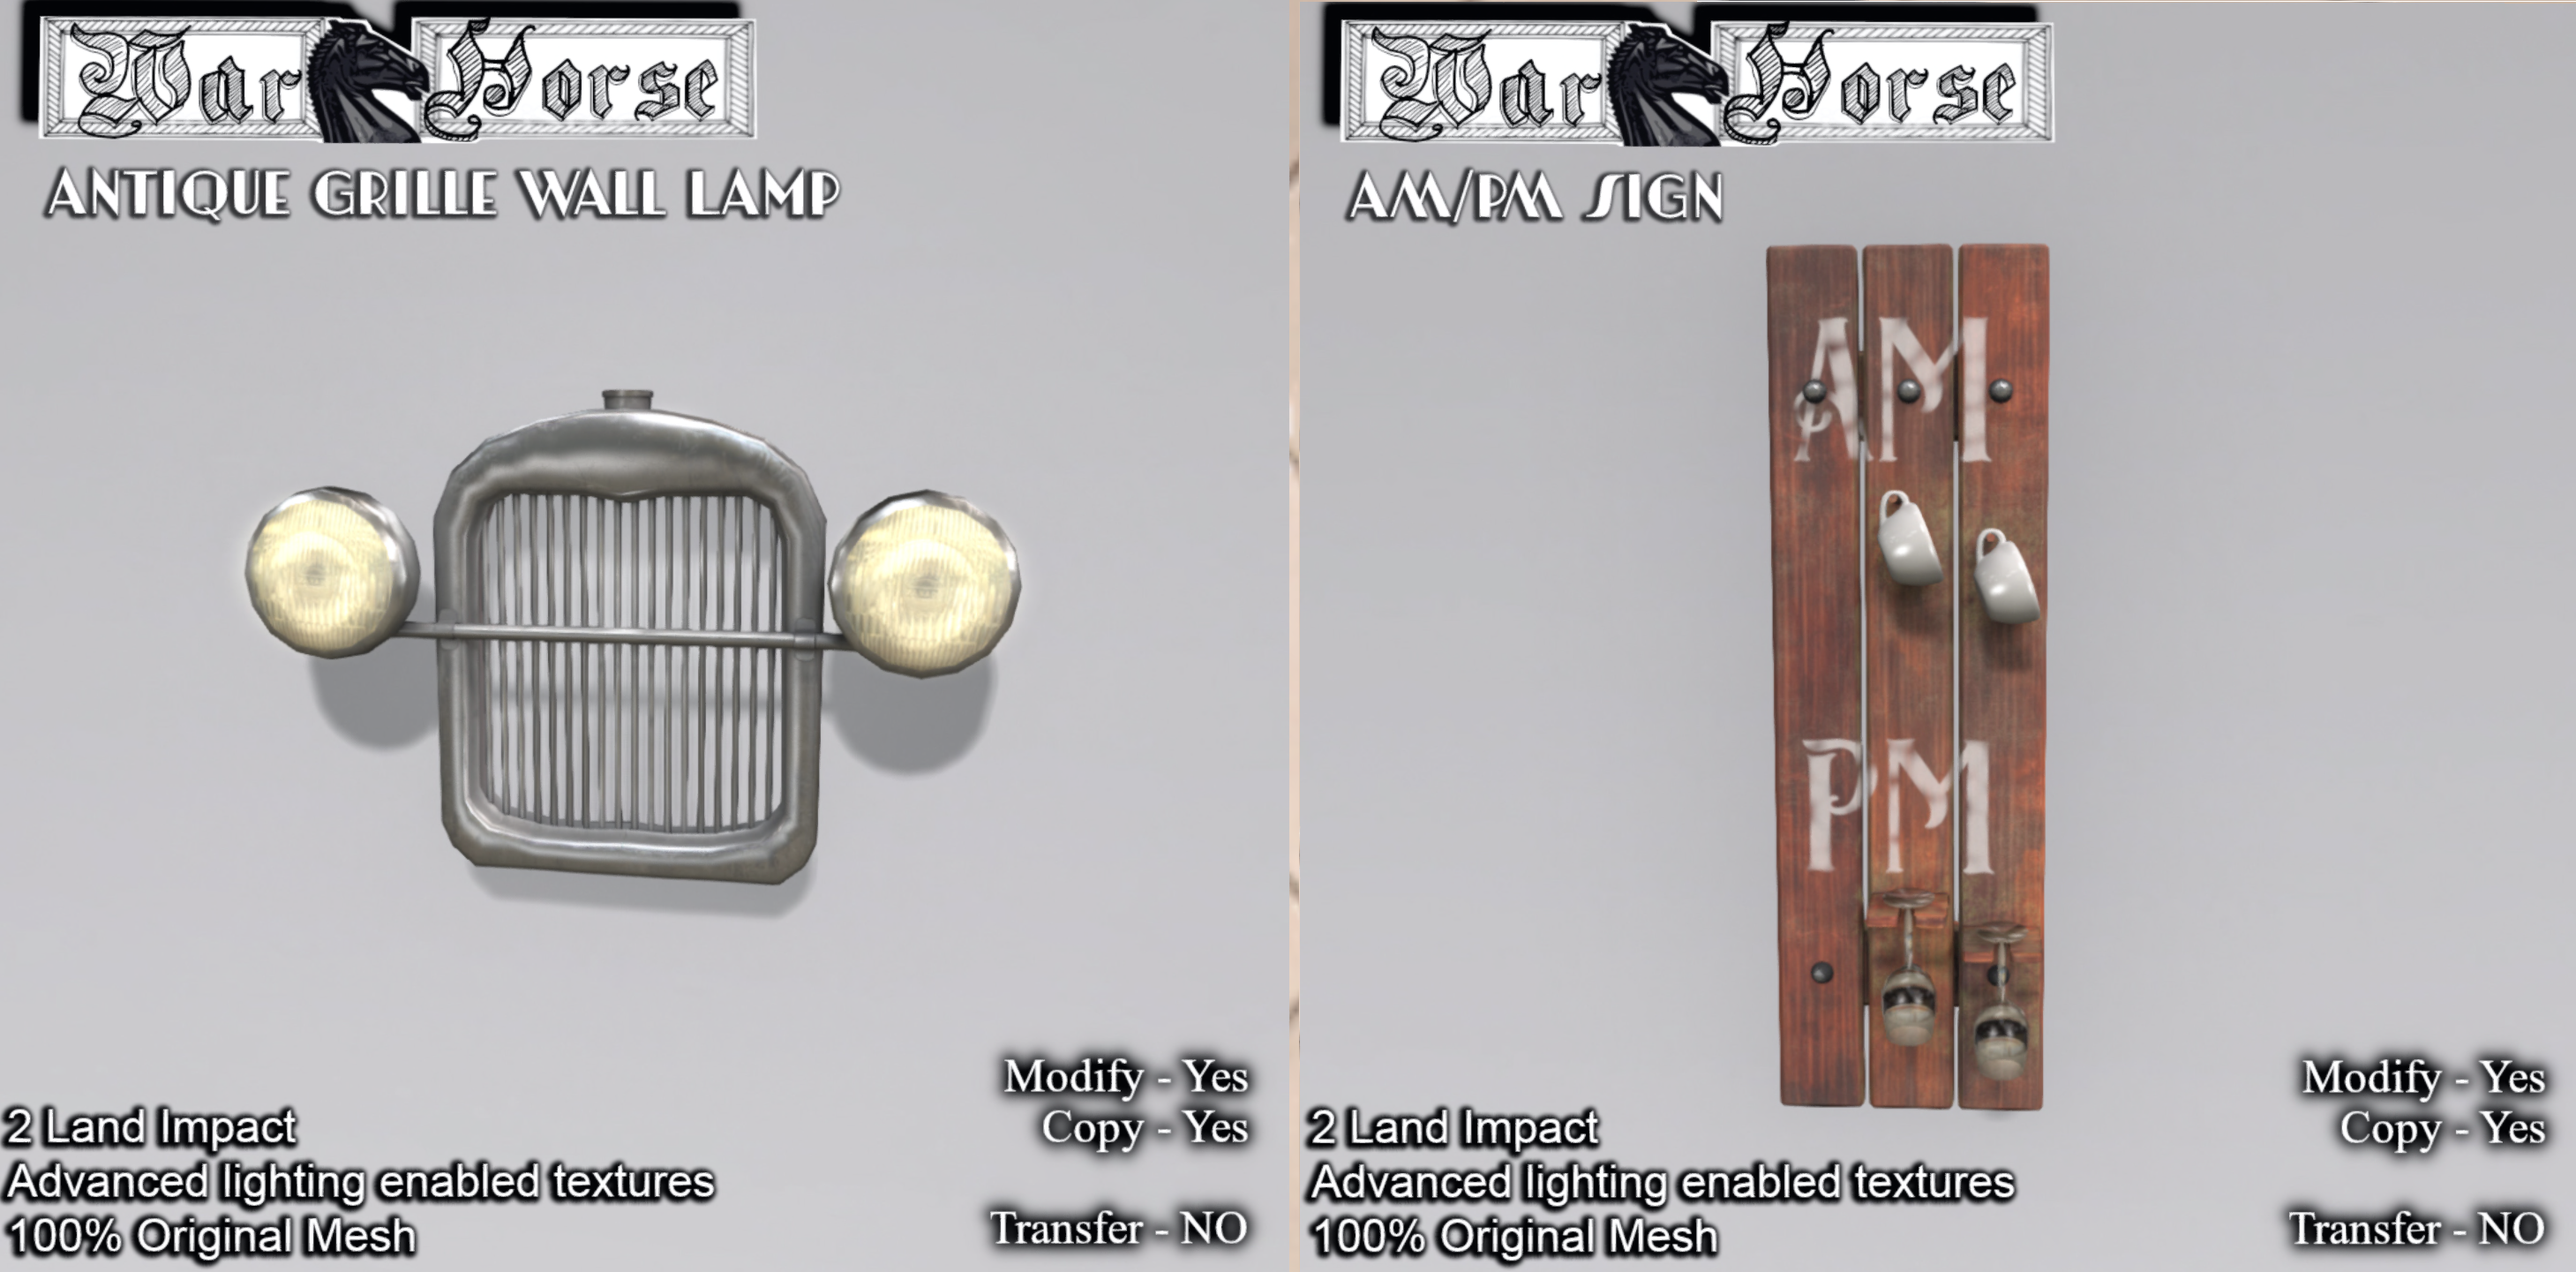 Warhorse – Antique Grille Wall Lamp & AM/PM Sign